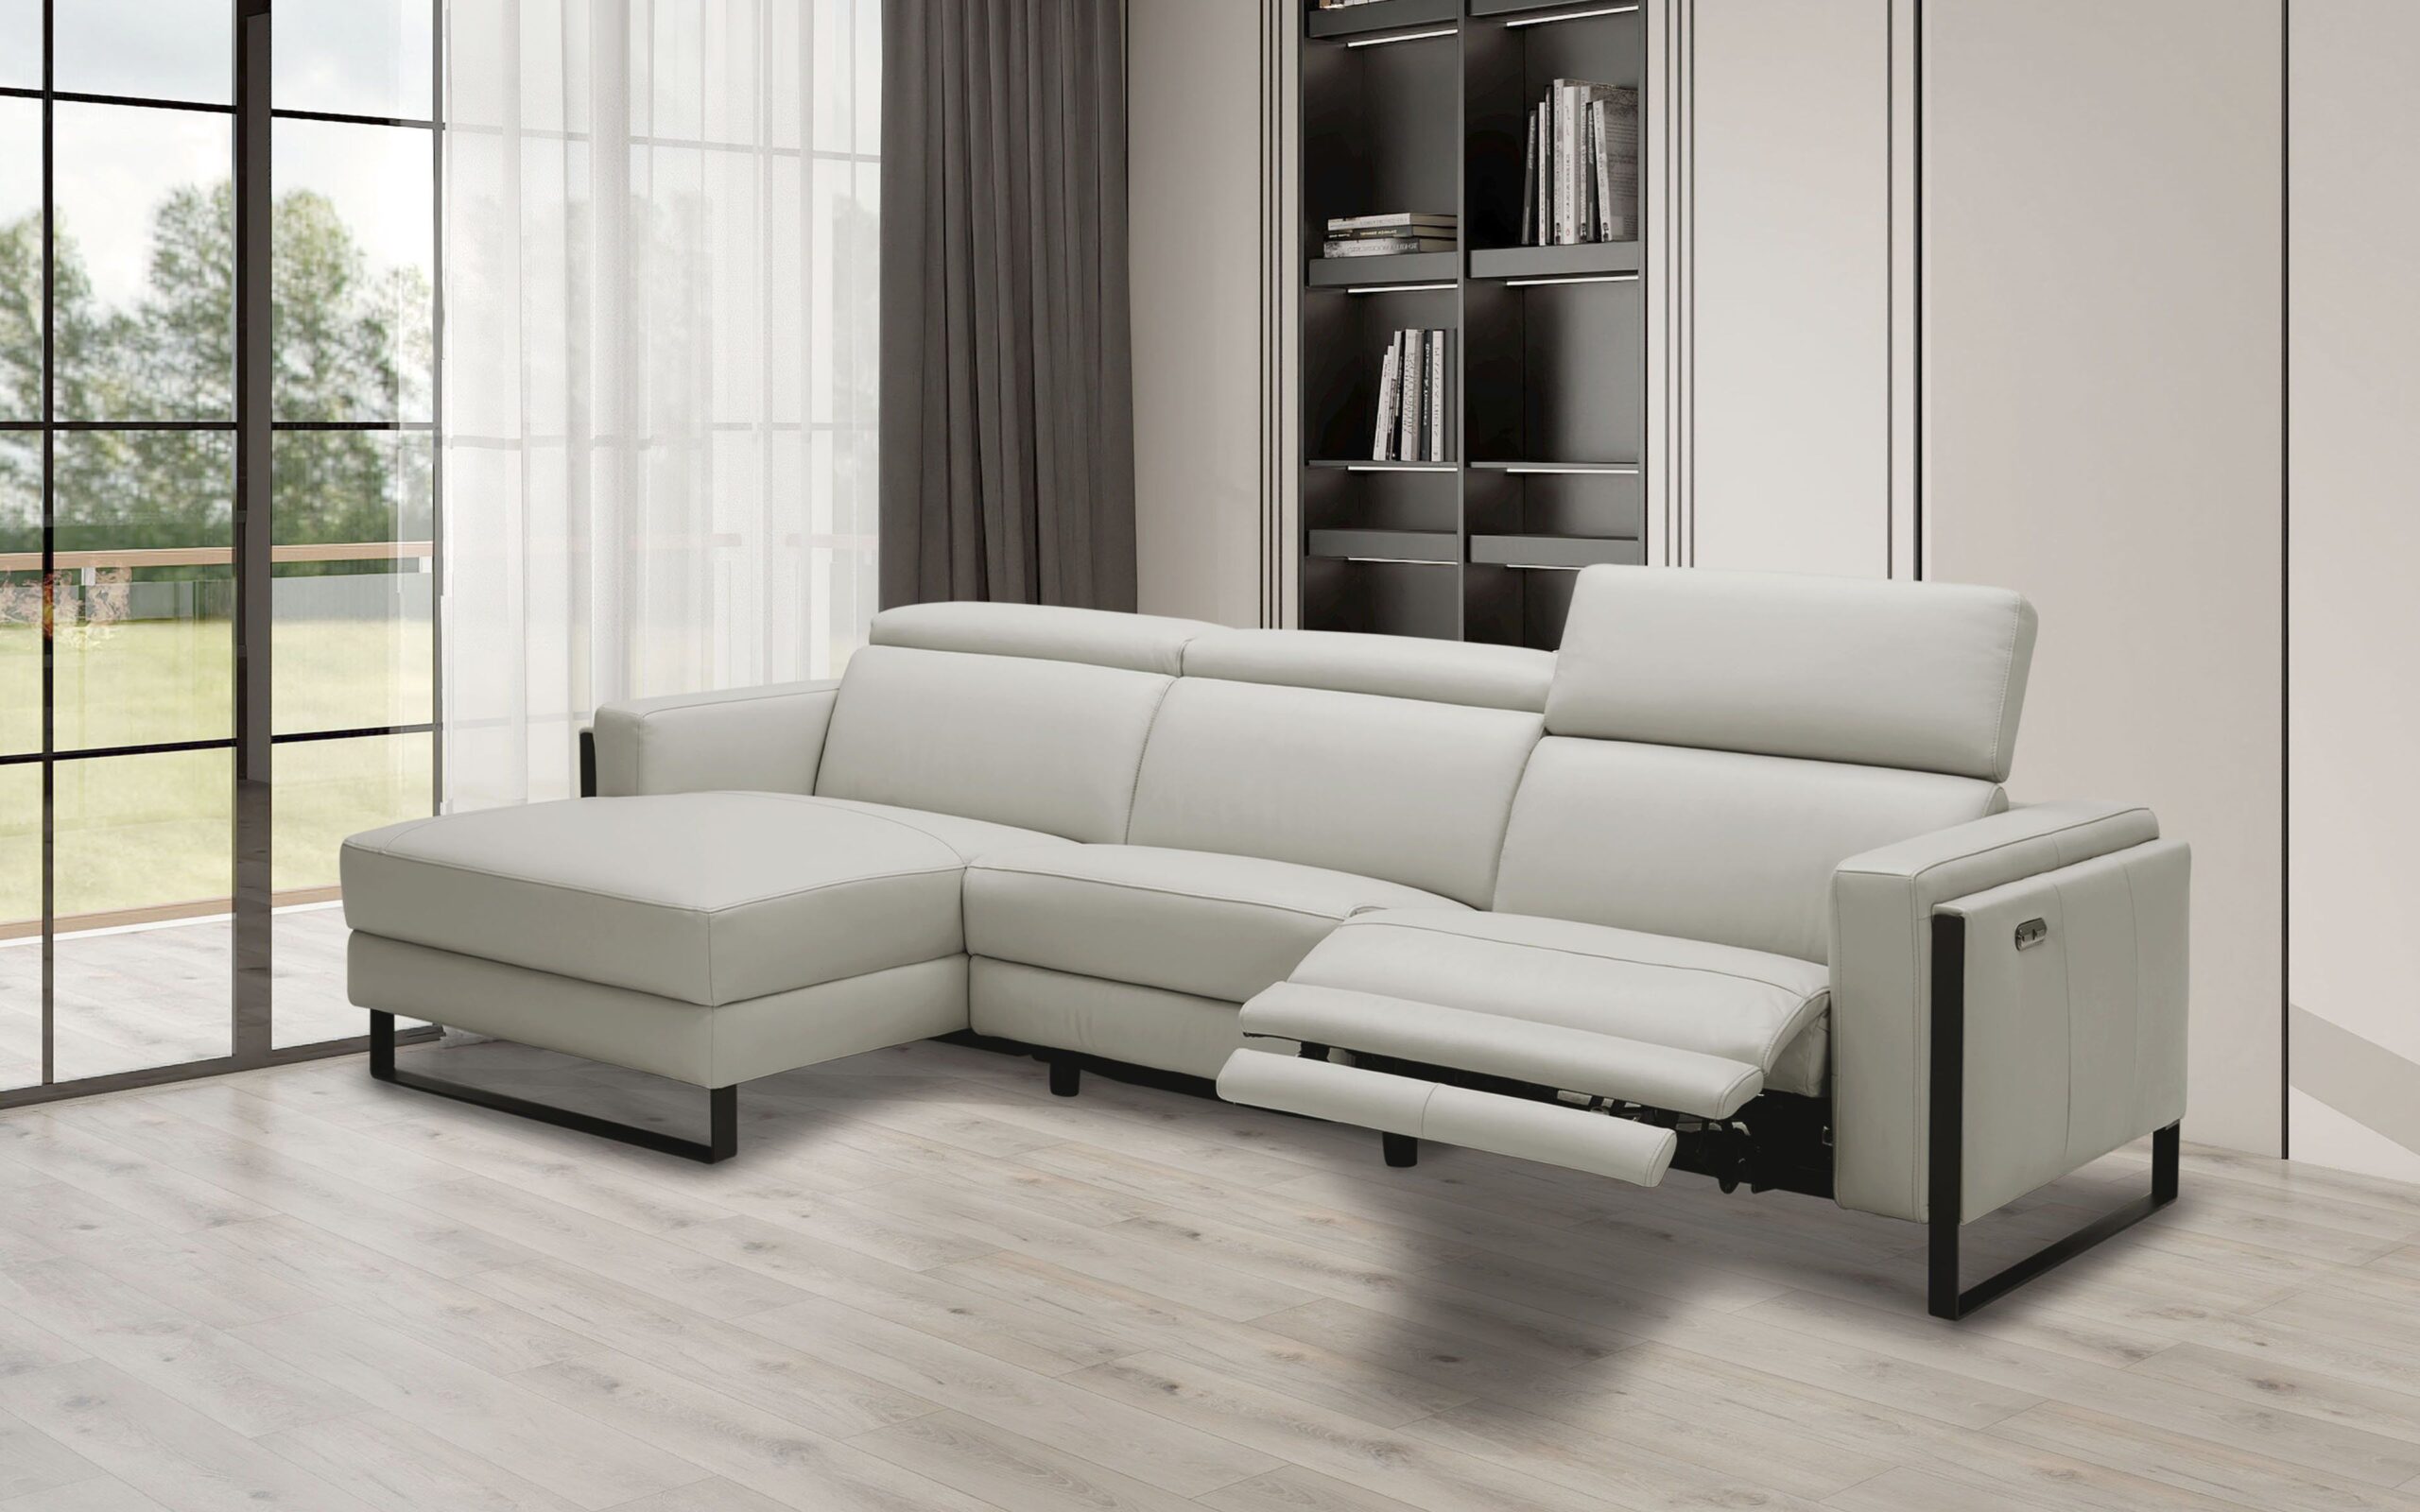 Ideas, Modern Reclining Sofa : Pictures